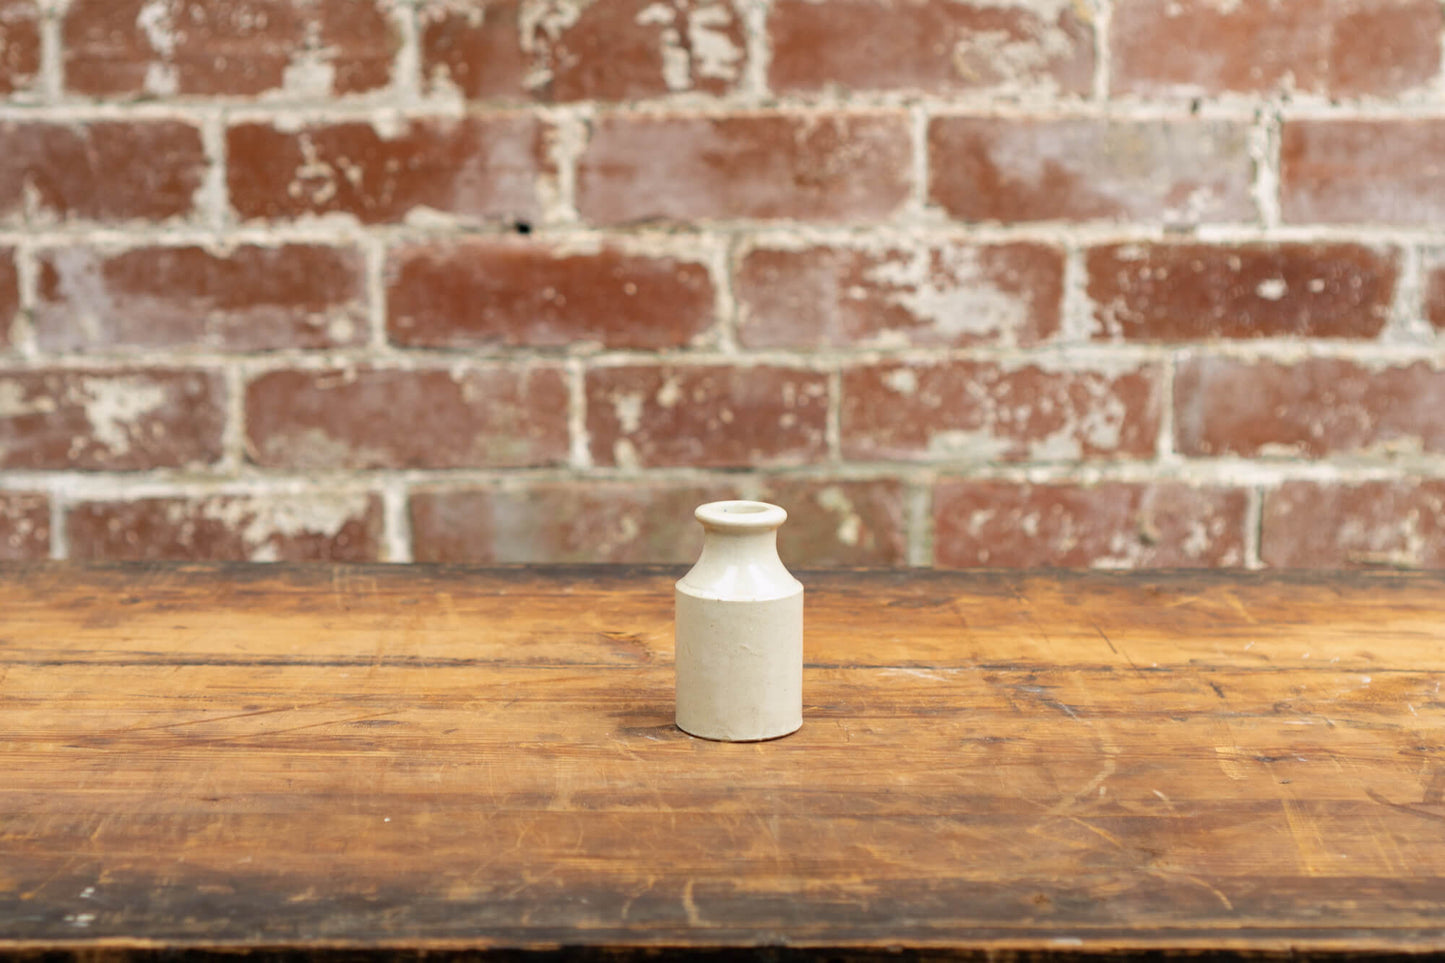 Image shows a collection of victorian stoneware bottles in shades of ivory, displayed neatly against a red brick wall backdrop